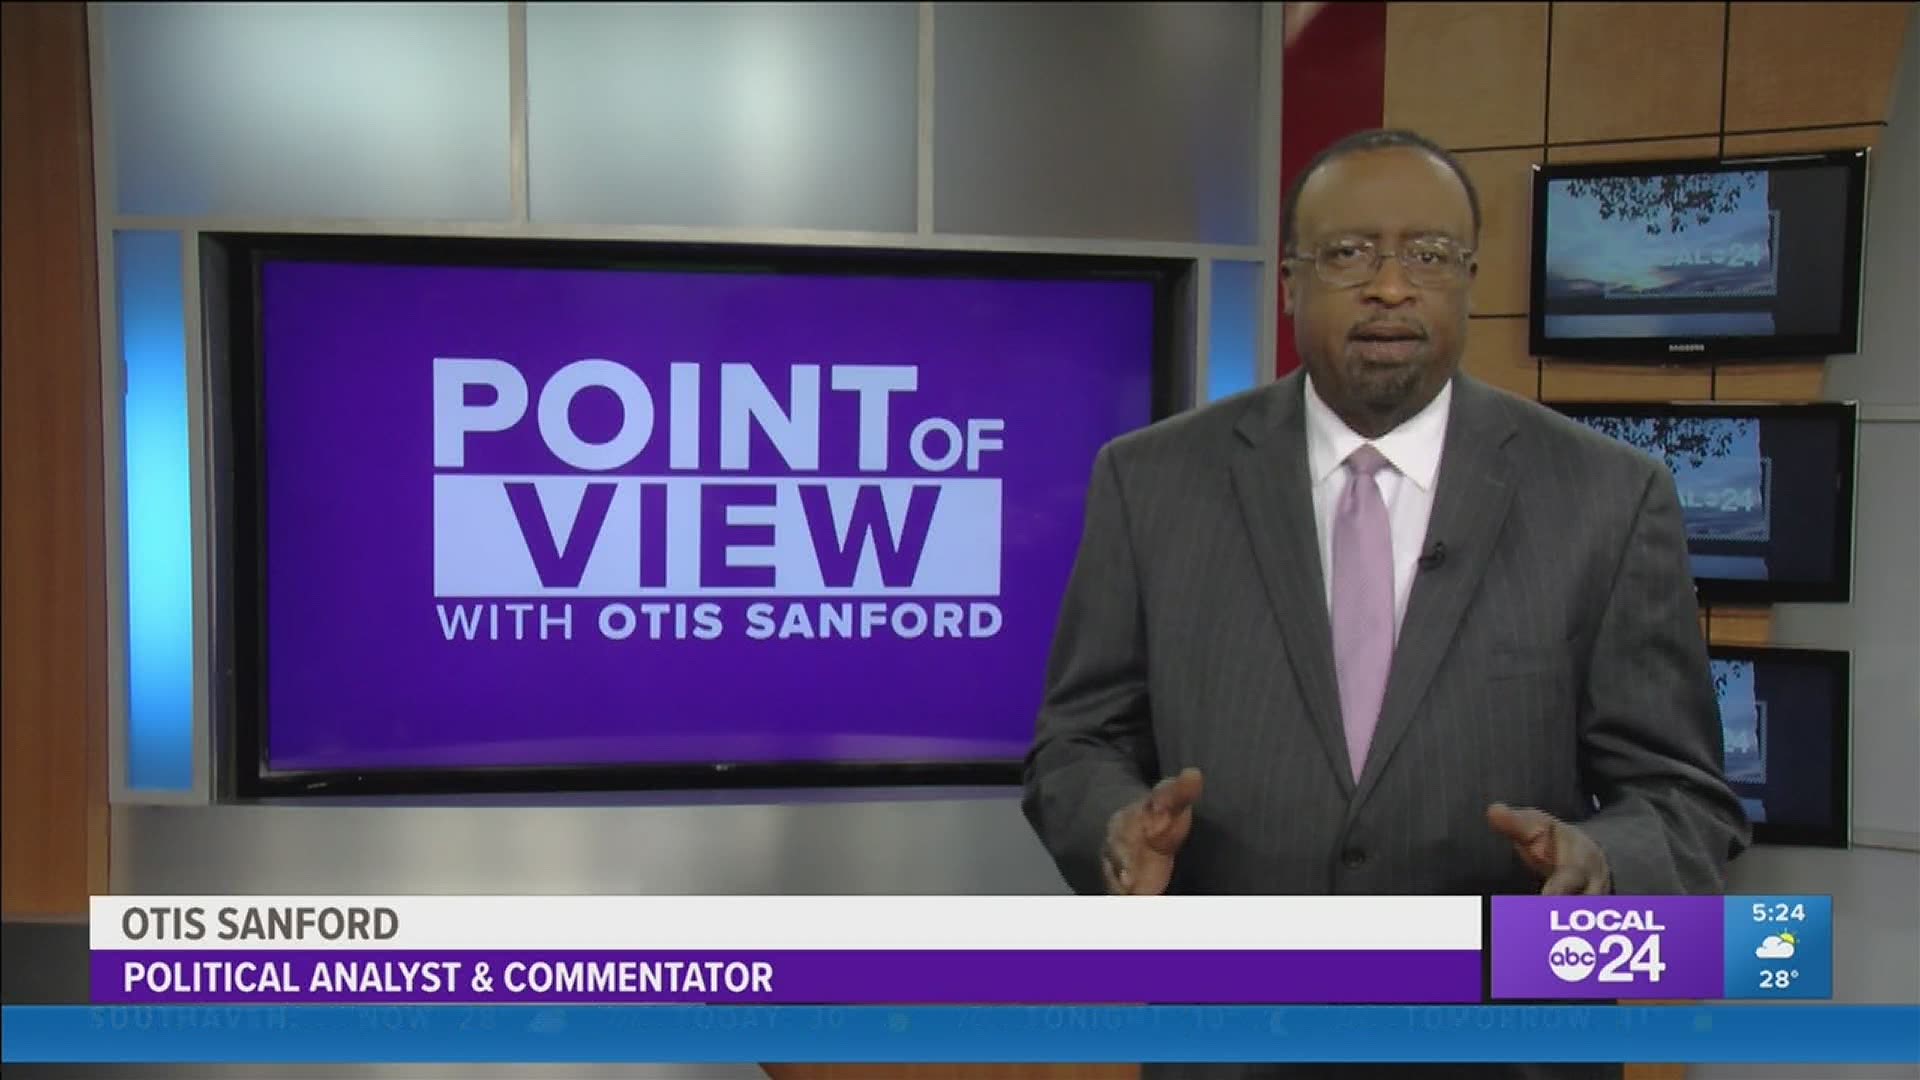 Local 24 News political analyst and commentator Otis Sanford shares his point of view on Mississippi Rep. Bennie Thompson’s lawsuit against former President Trump.